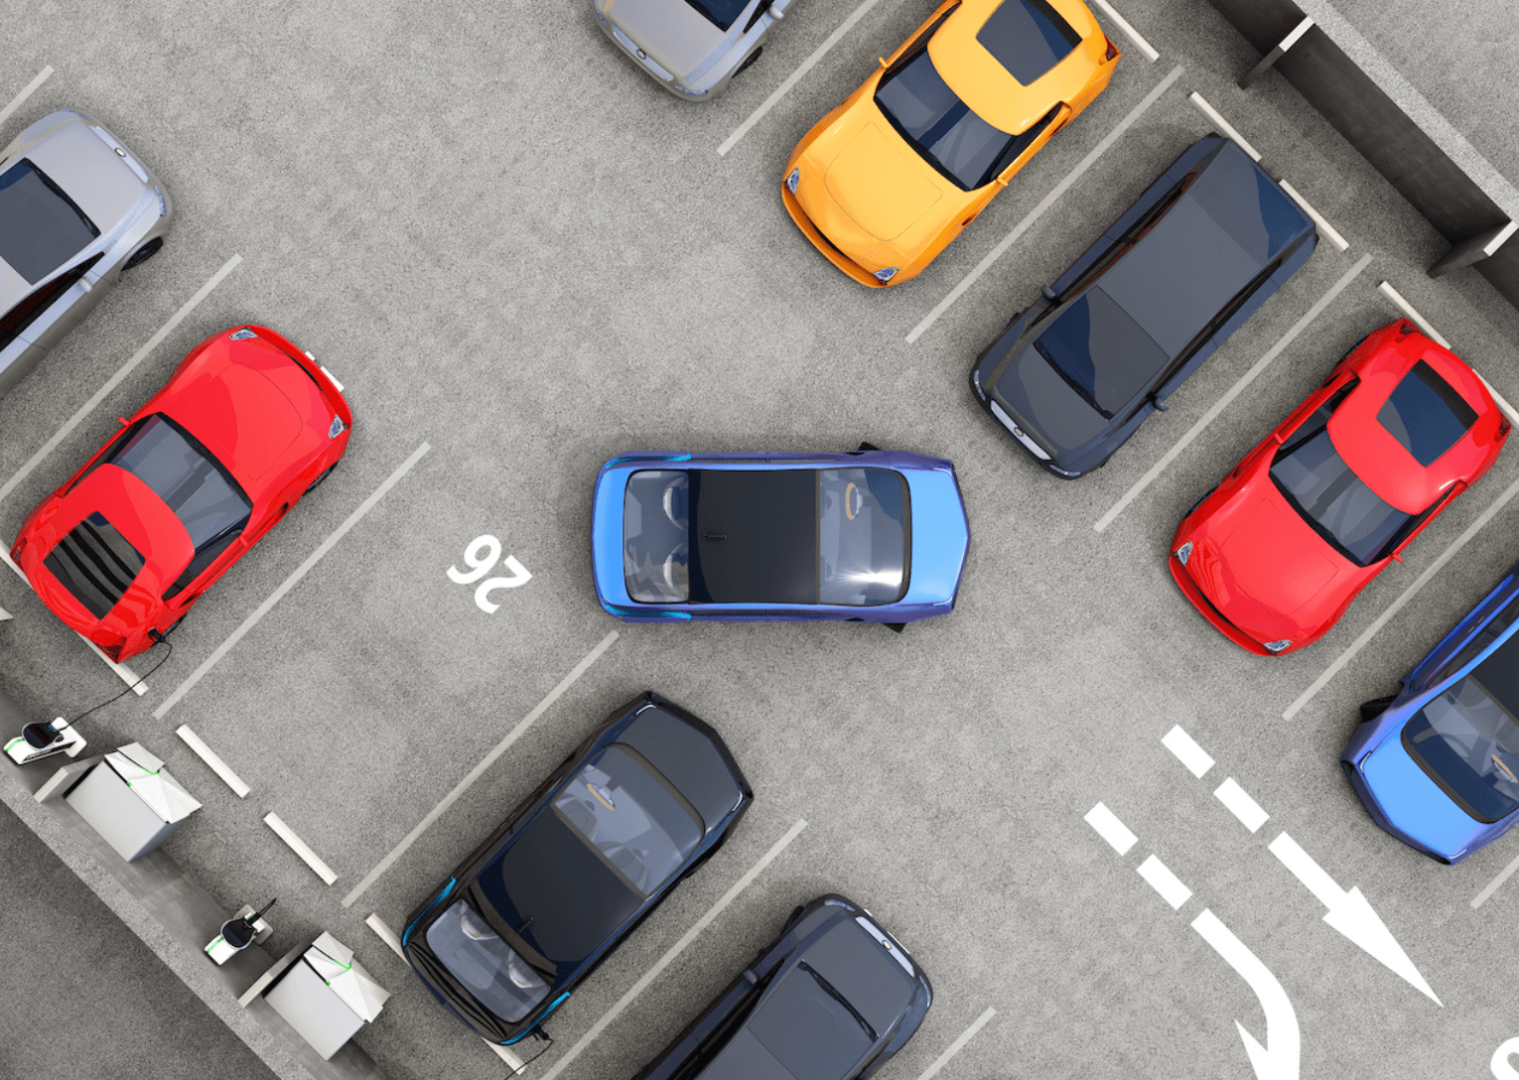 How Smart Parking Prevents Illegal On-Street Parking